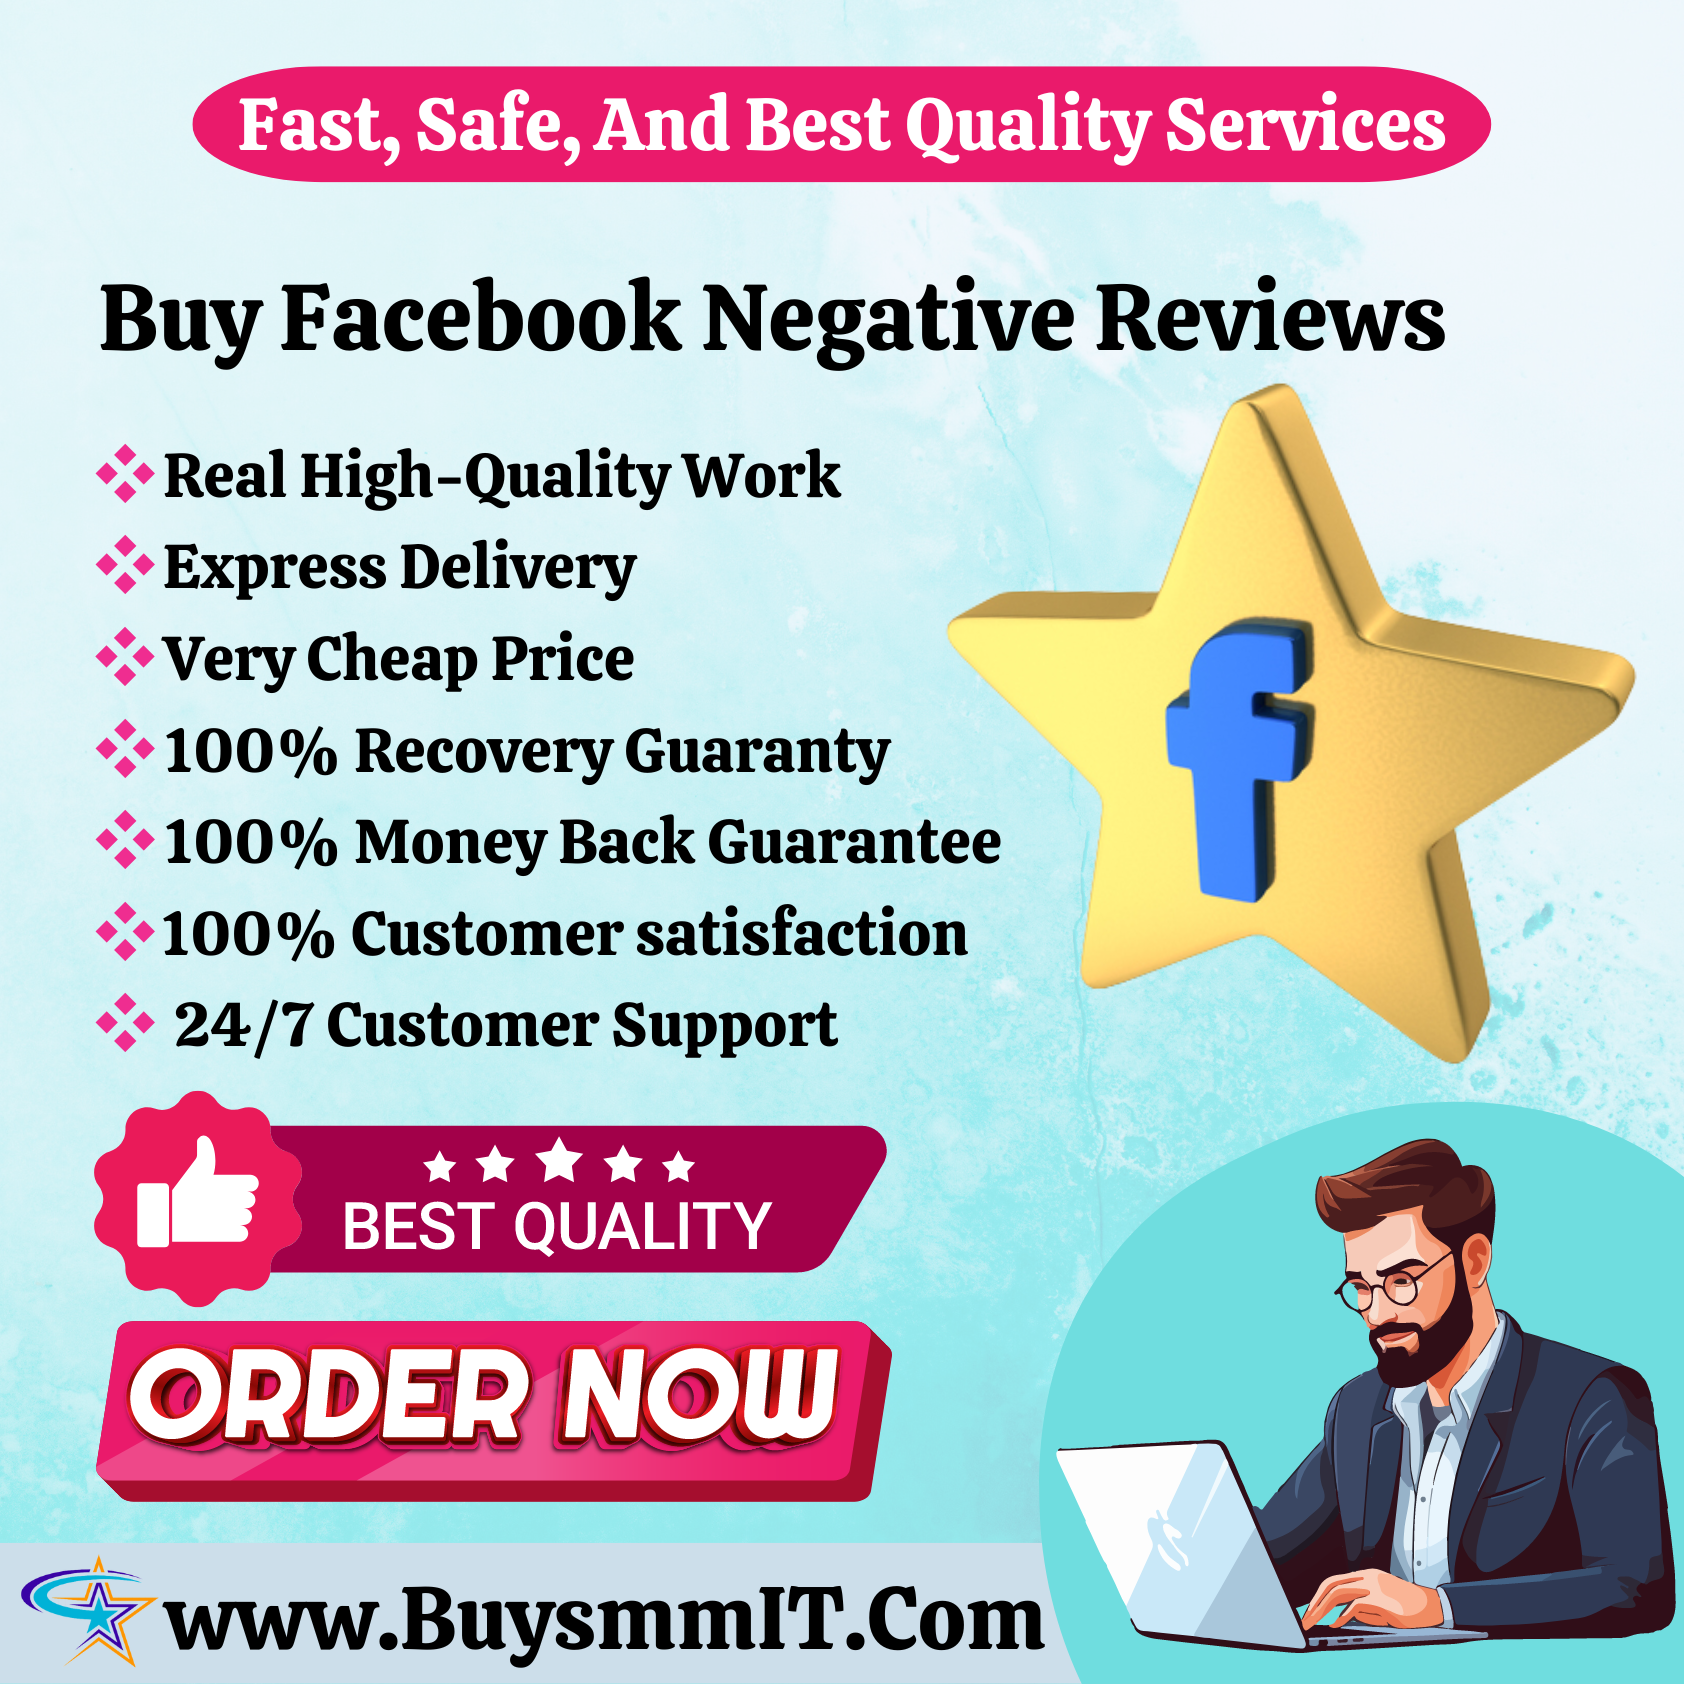 Buy Facebook Negative Reviews - 100% High Quality Service